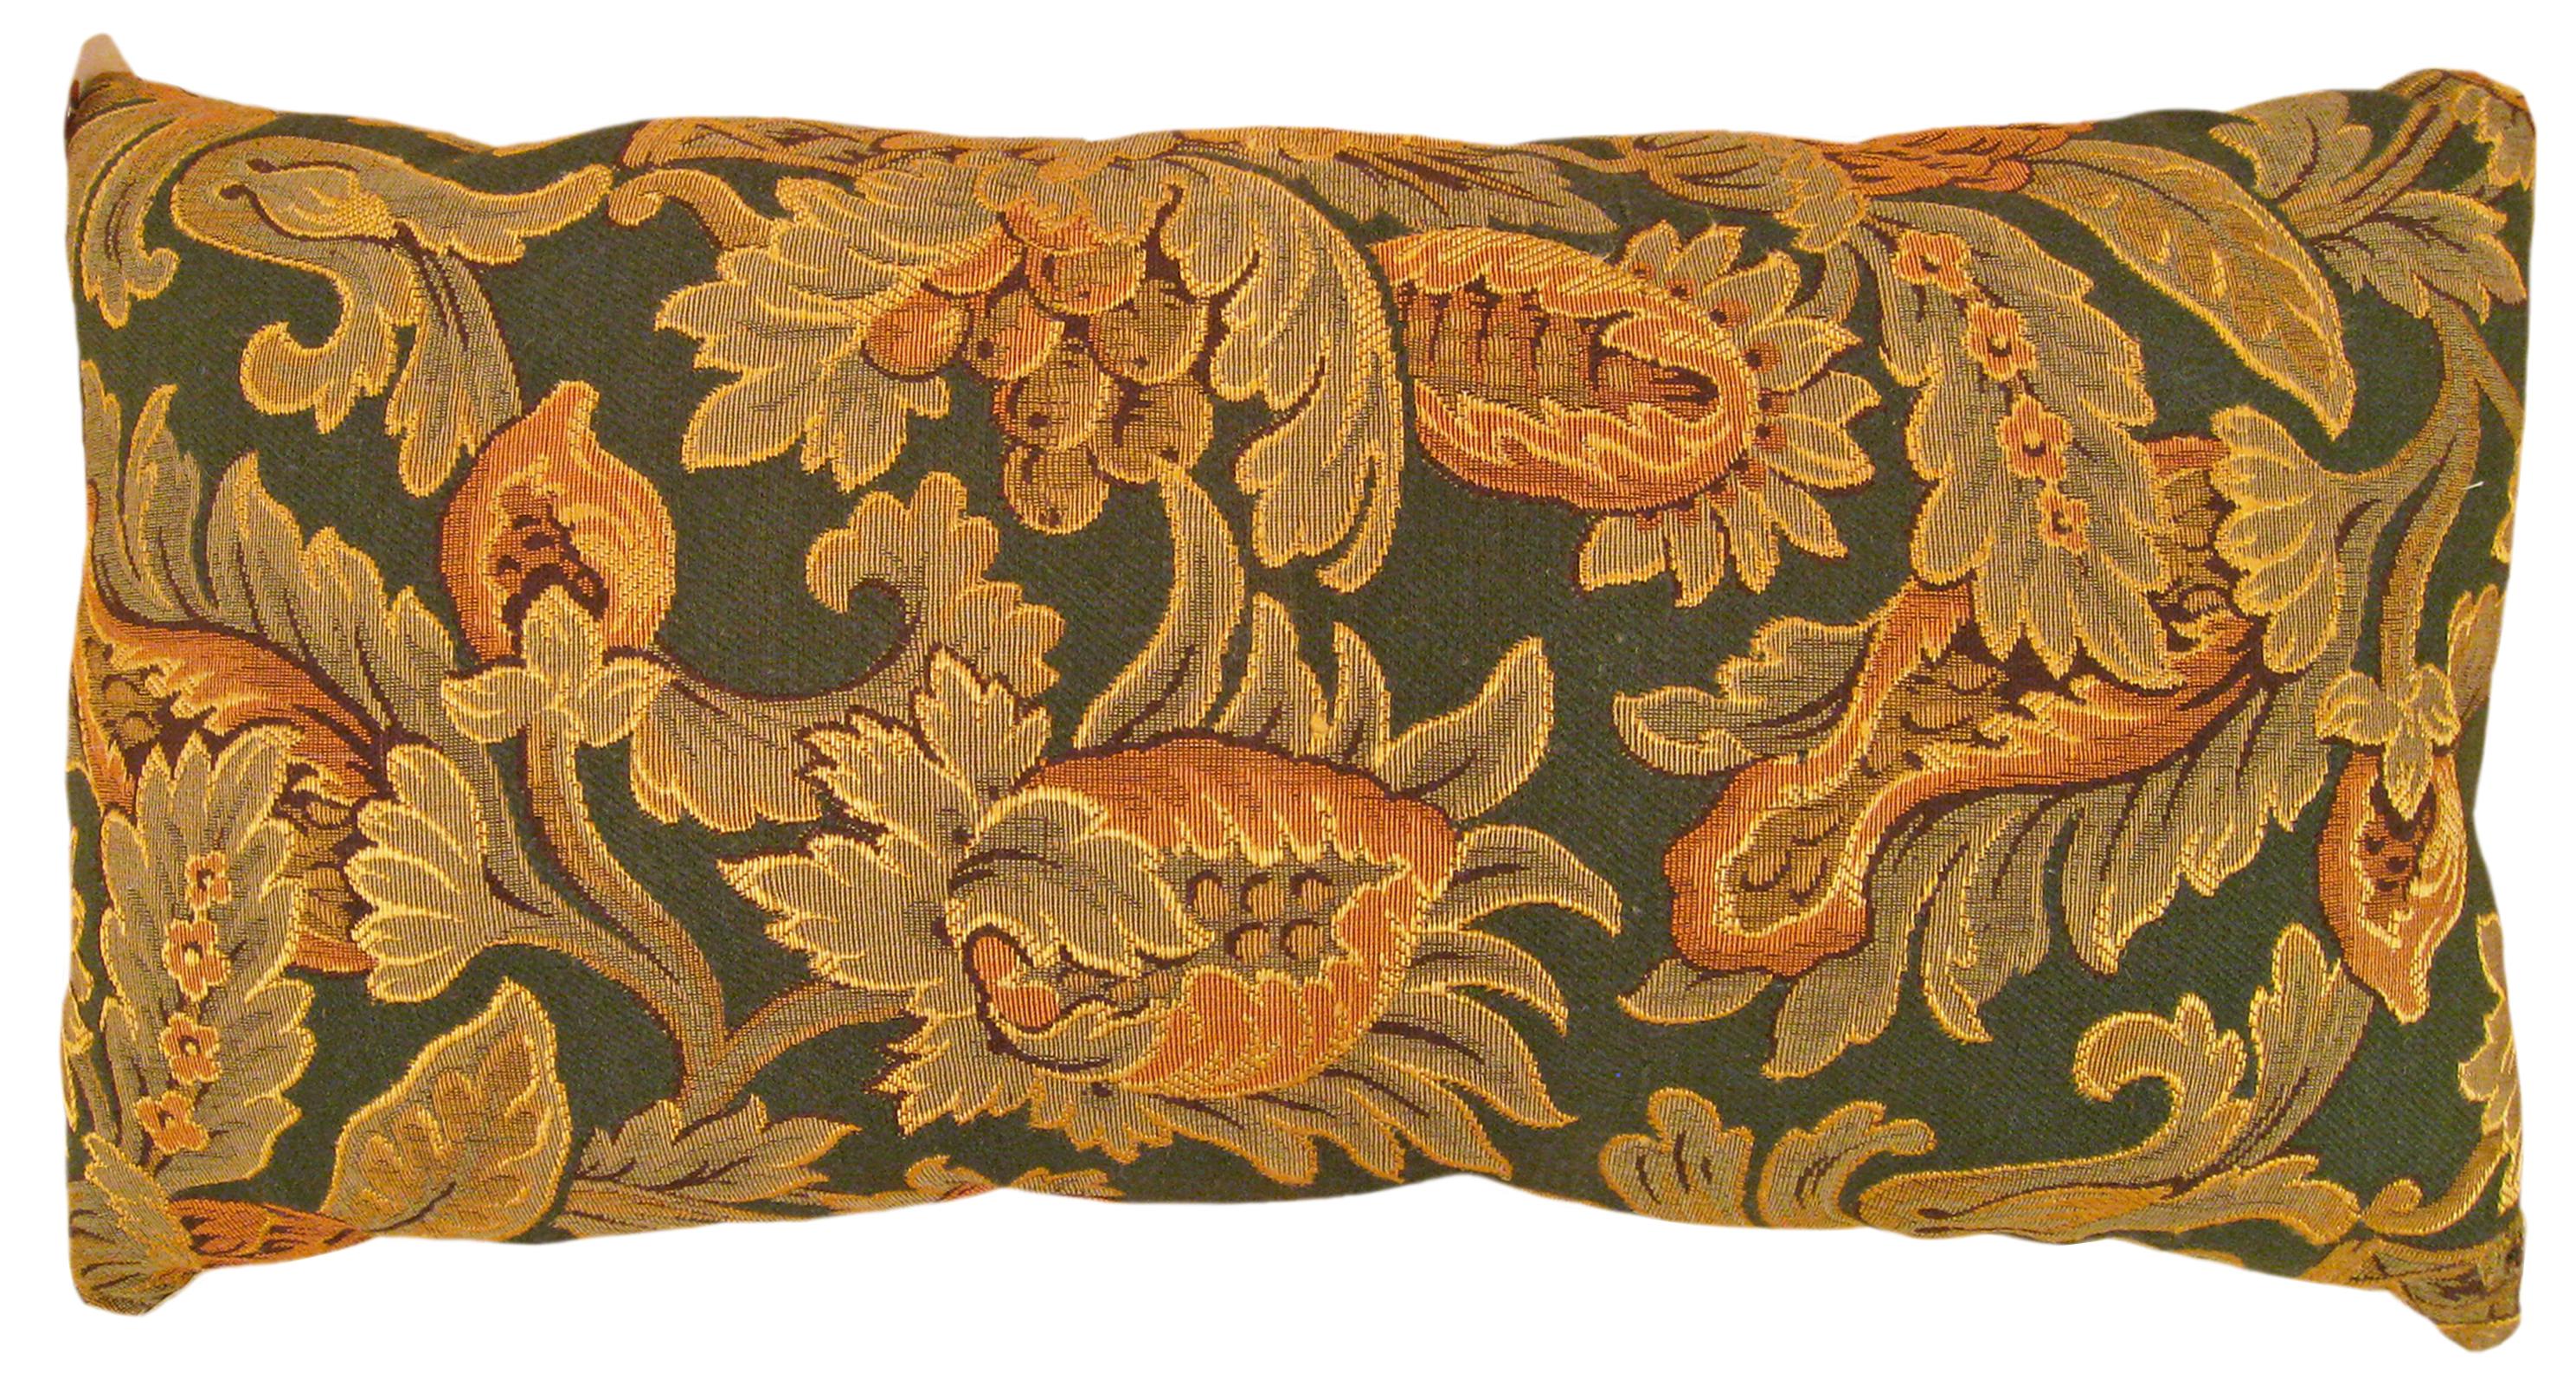 Early 20th Century Pair of Decorative Antique Jacquard Tapestry Pillows with Floral Elements  For Sale